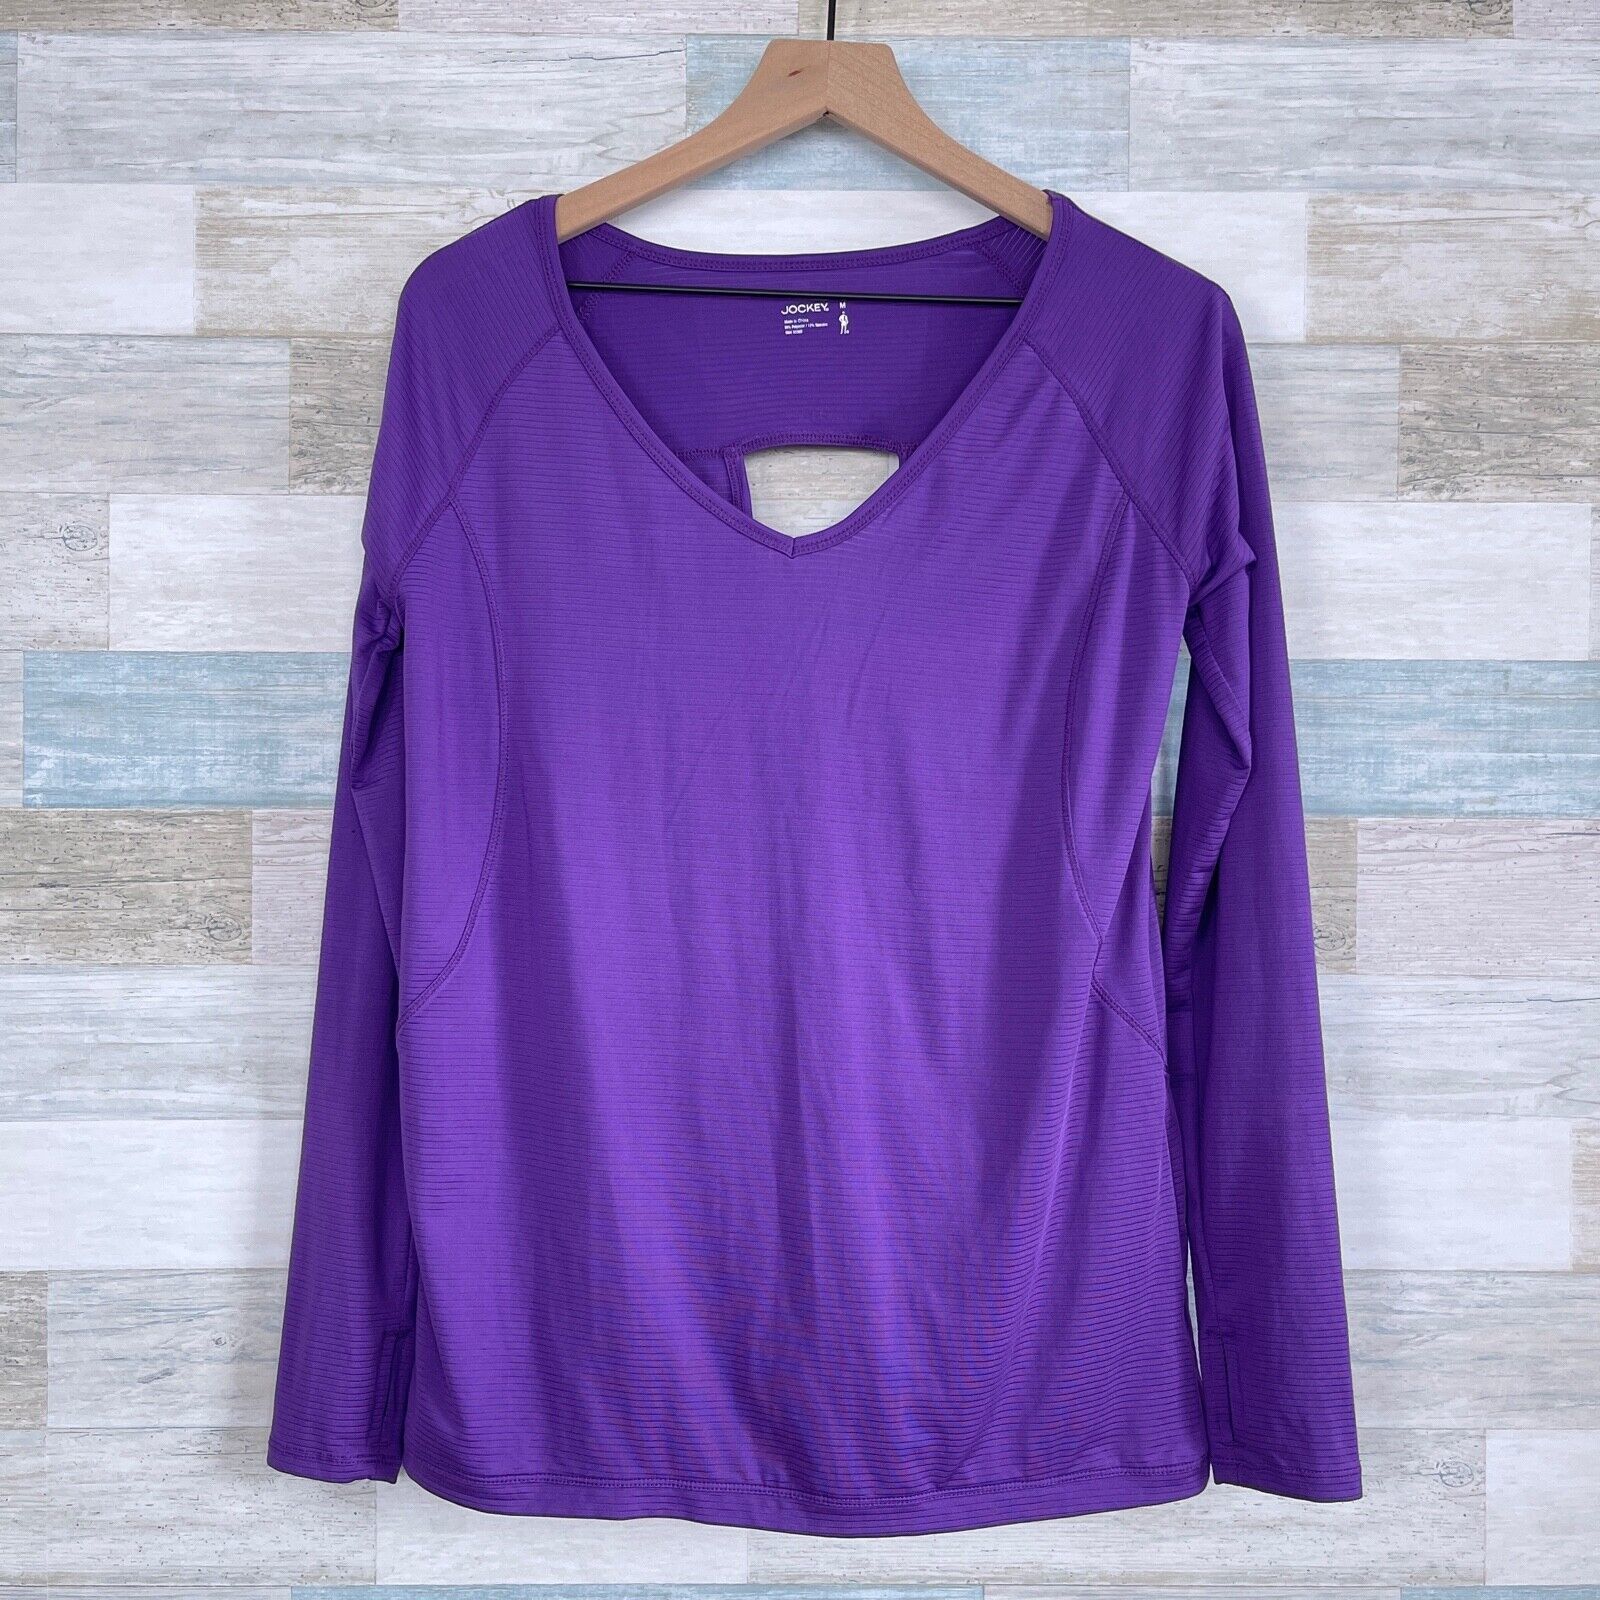 Primary image for Jockey Cut Out Crossover Back Activewear Top Purple Thumbholes Womens Medium